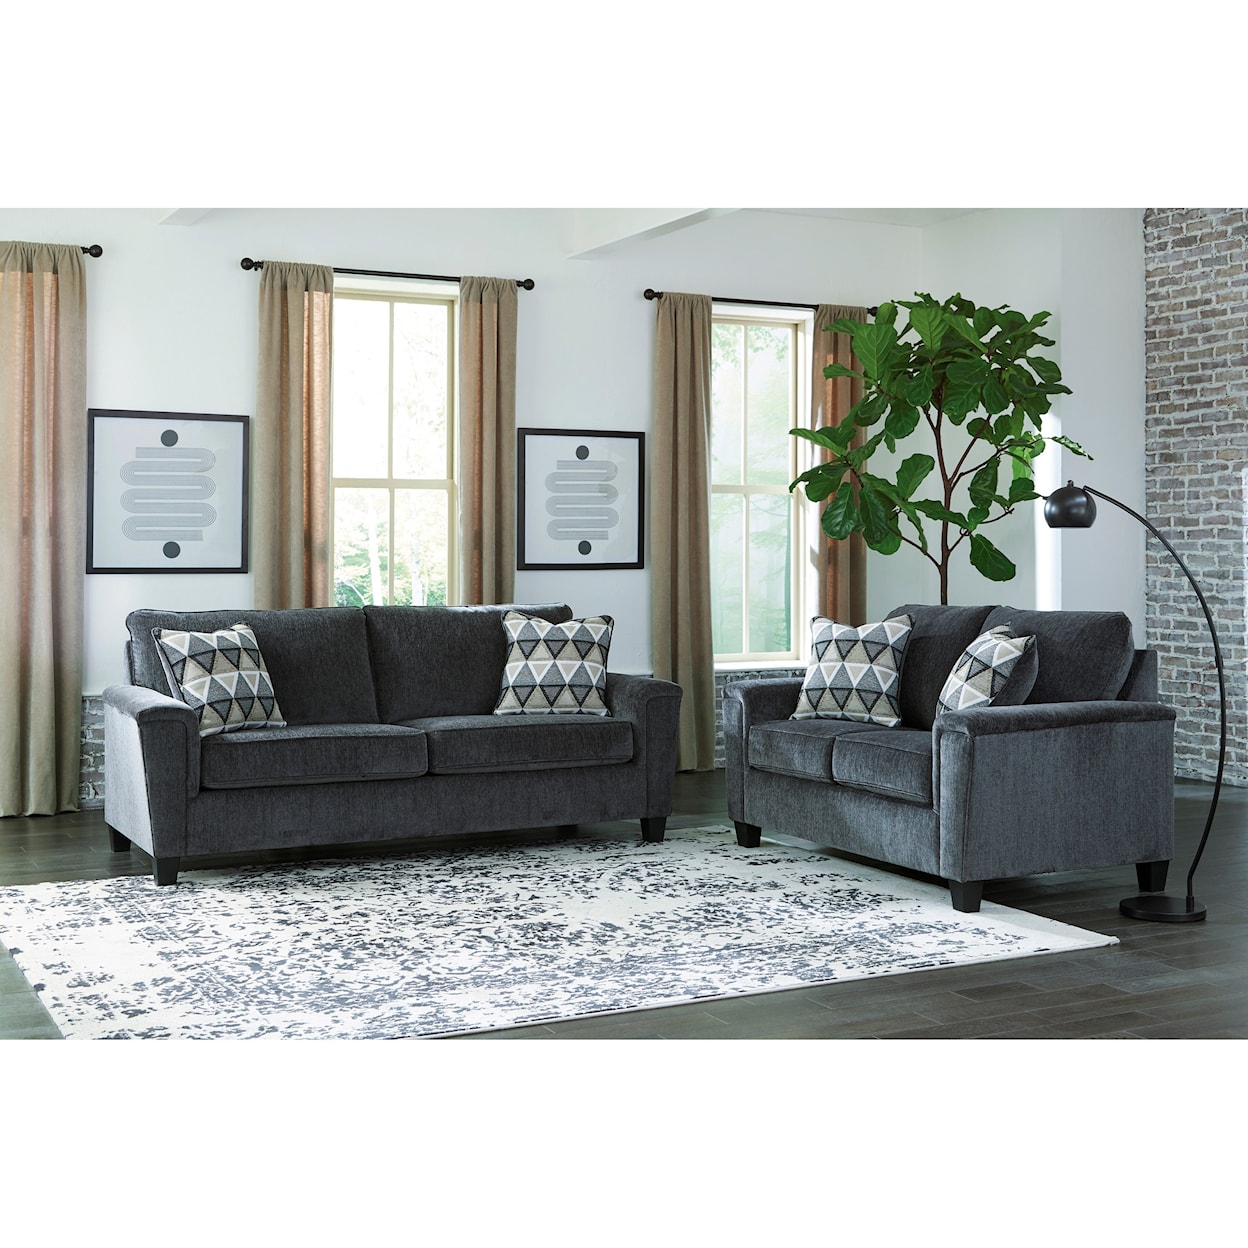 Signature Design by Ashley Abinger Sofa and Loveseat